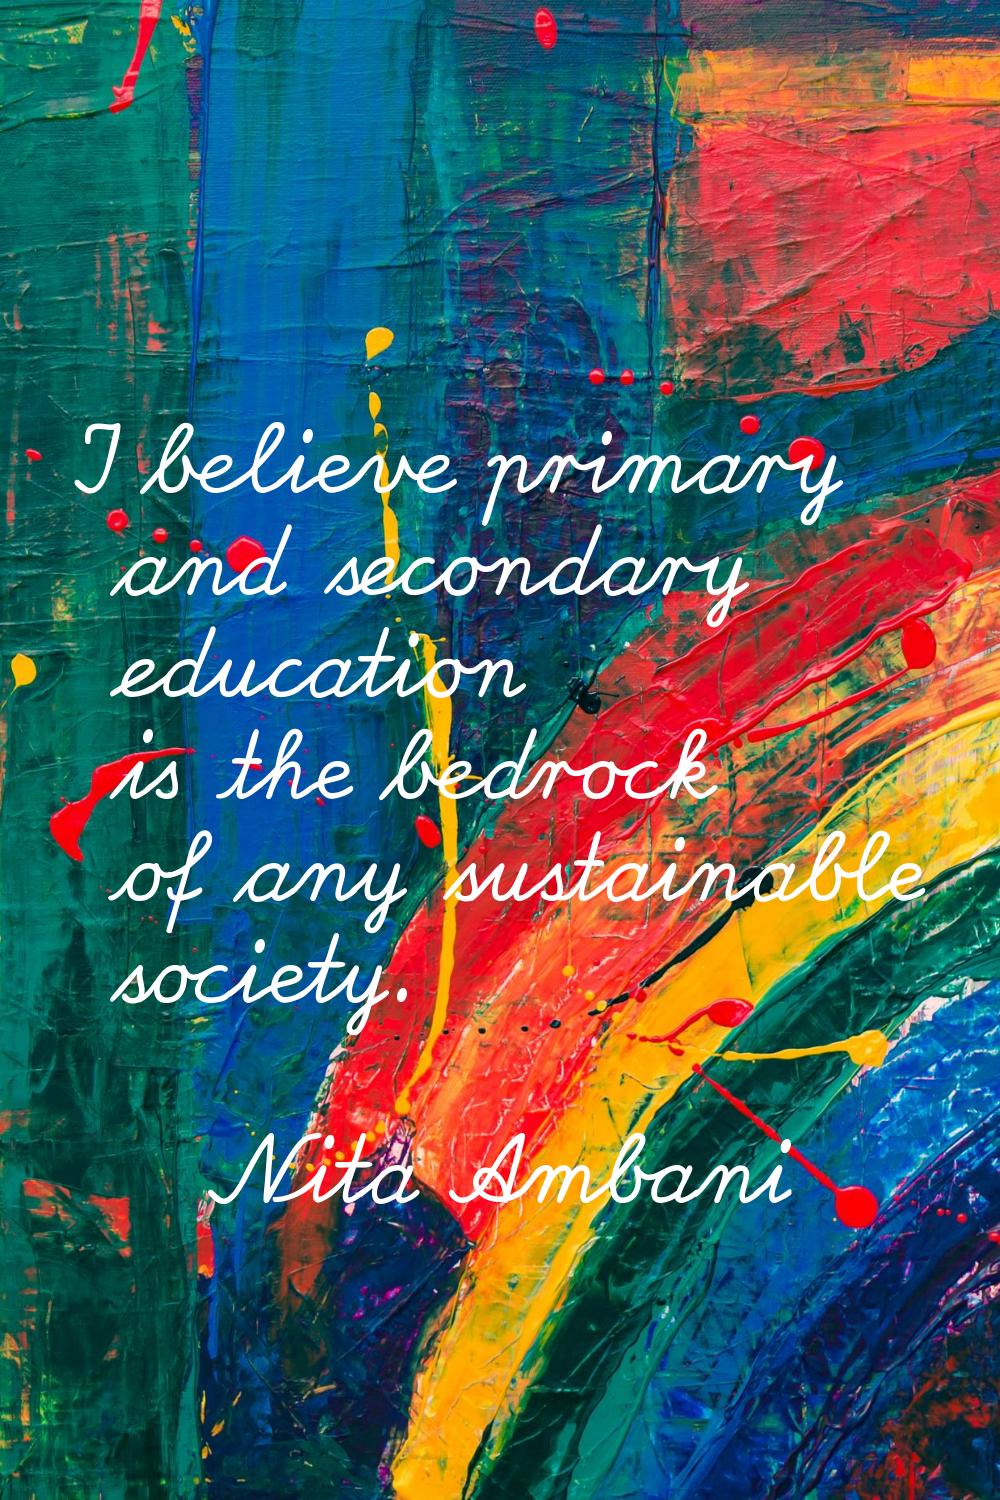 I believe primary and secondary education is the bedrock of any sustainable society.